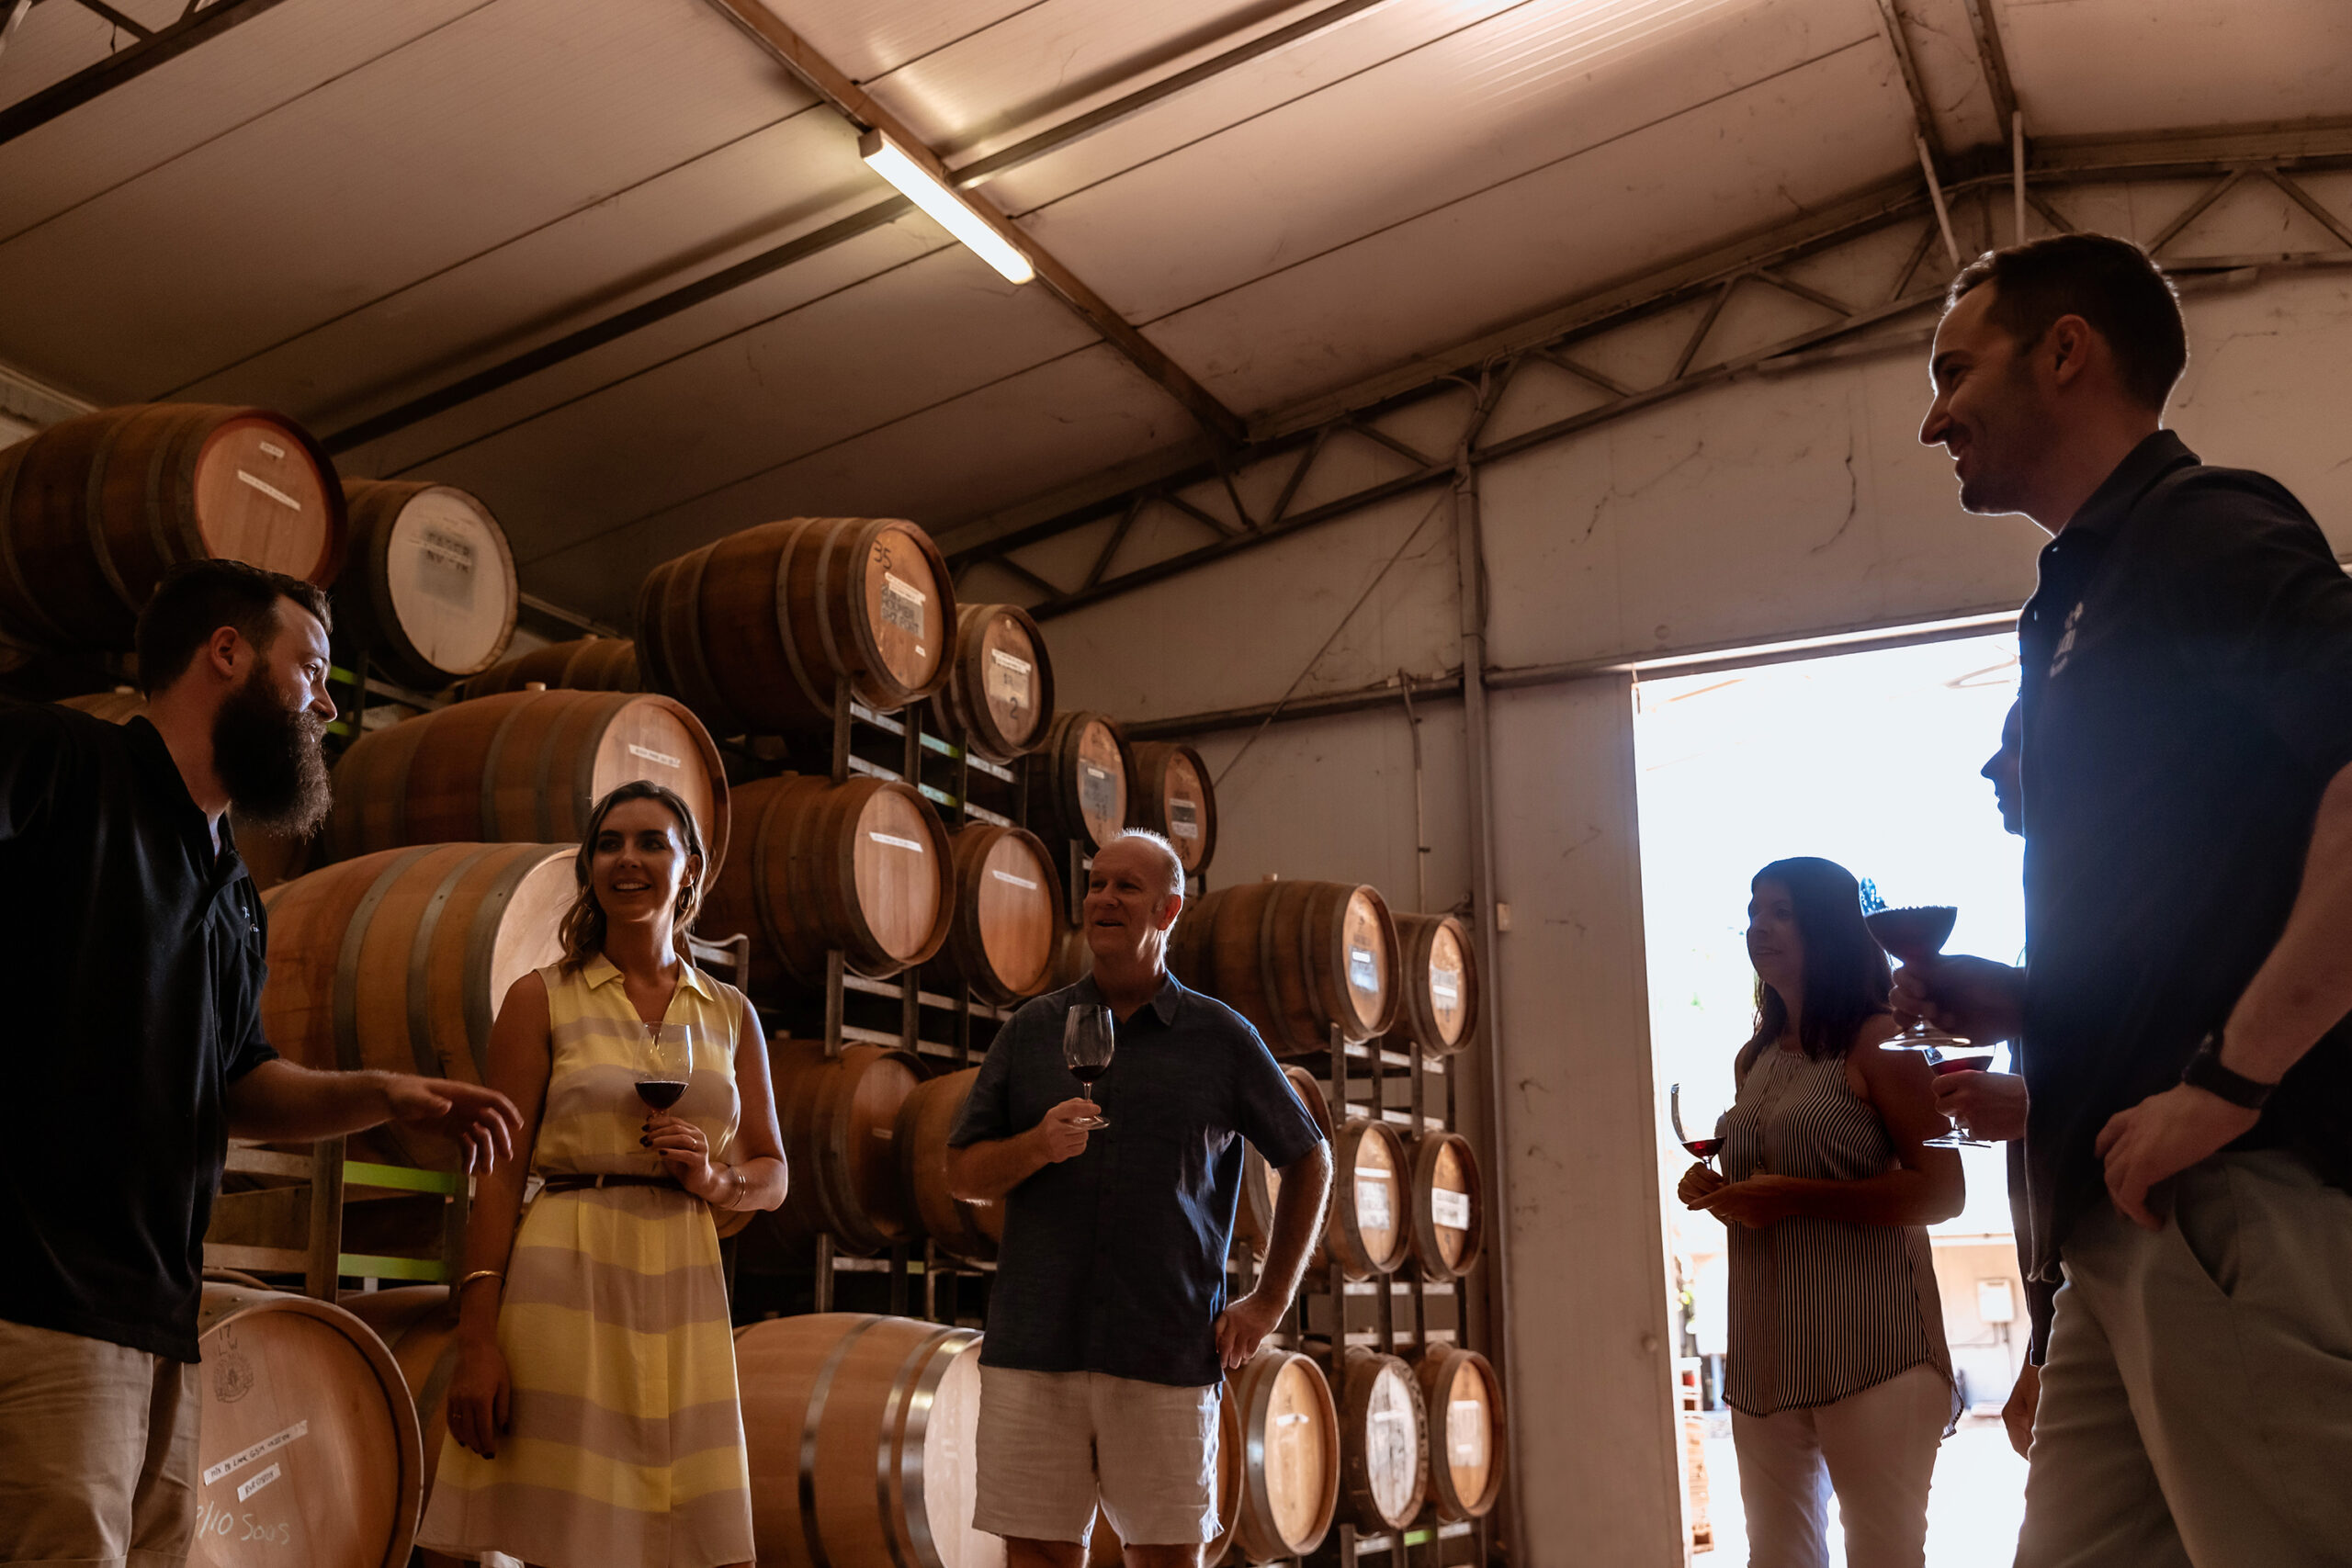 Swan Valley Premium Winelovers Experience - Full Day Wine Tour